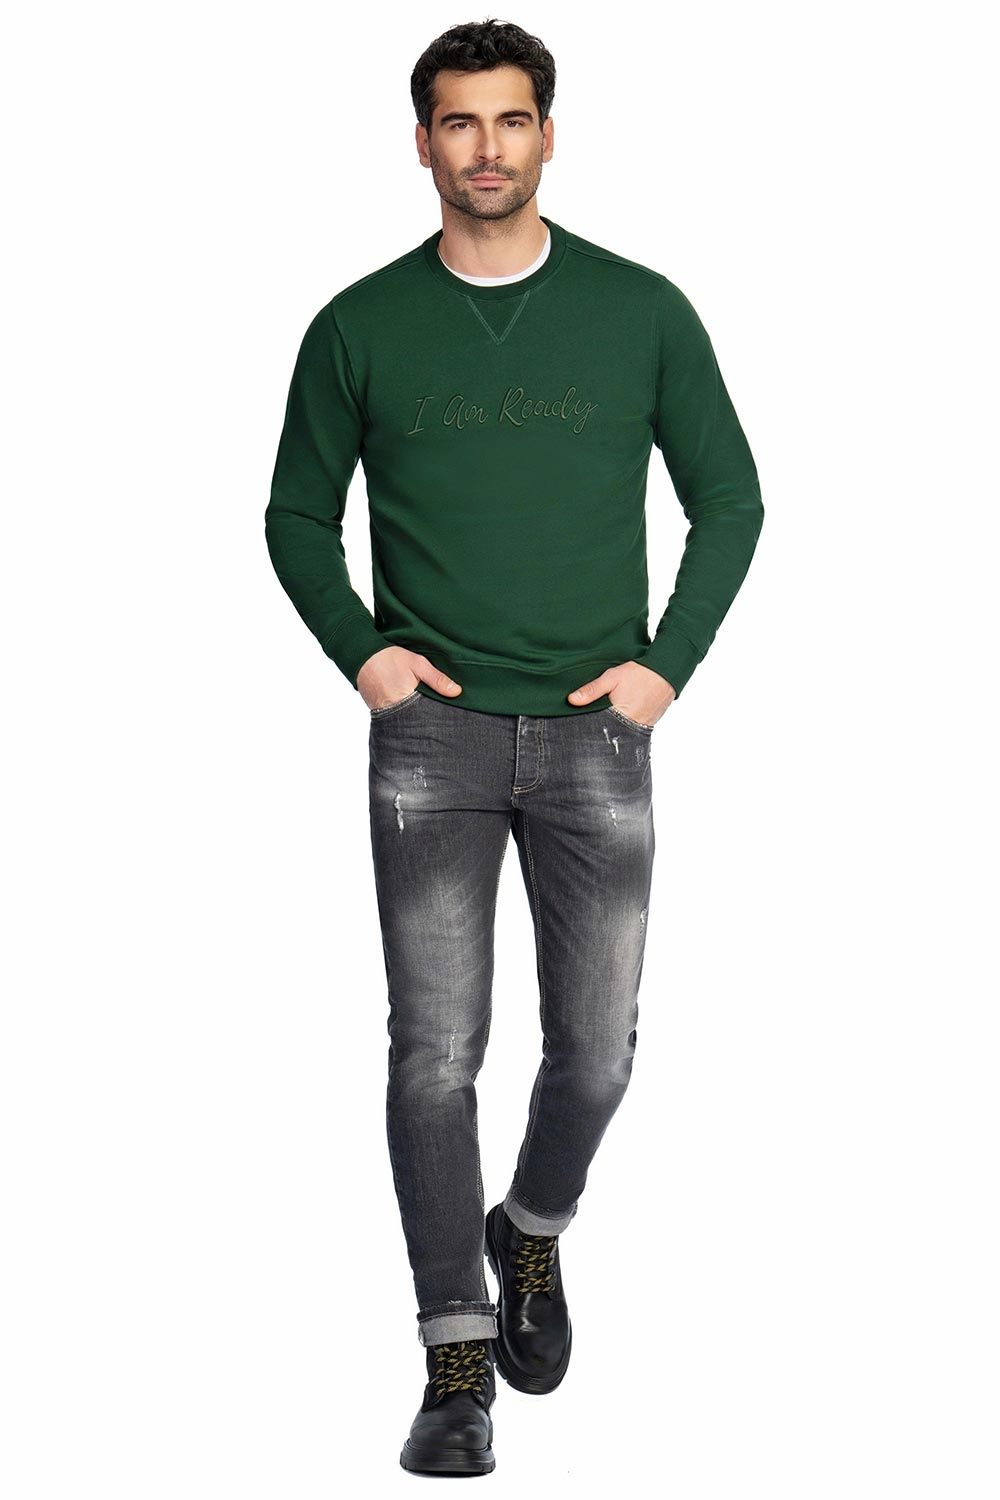 Hanorac slim verde - limited collection 3